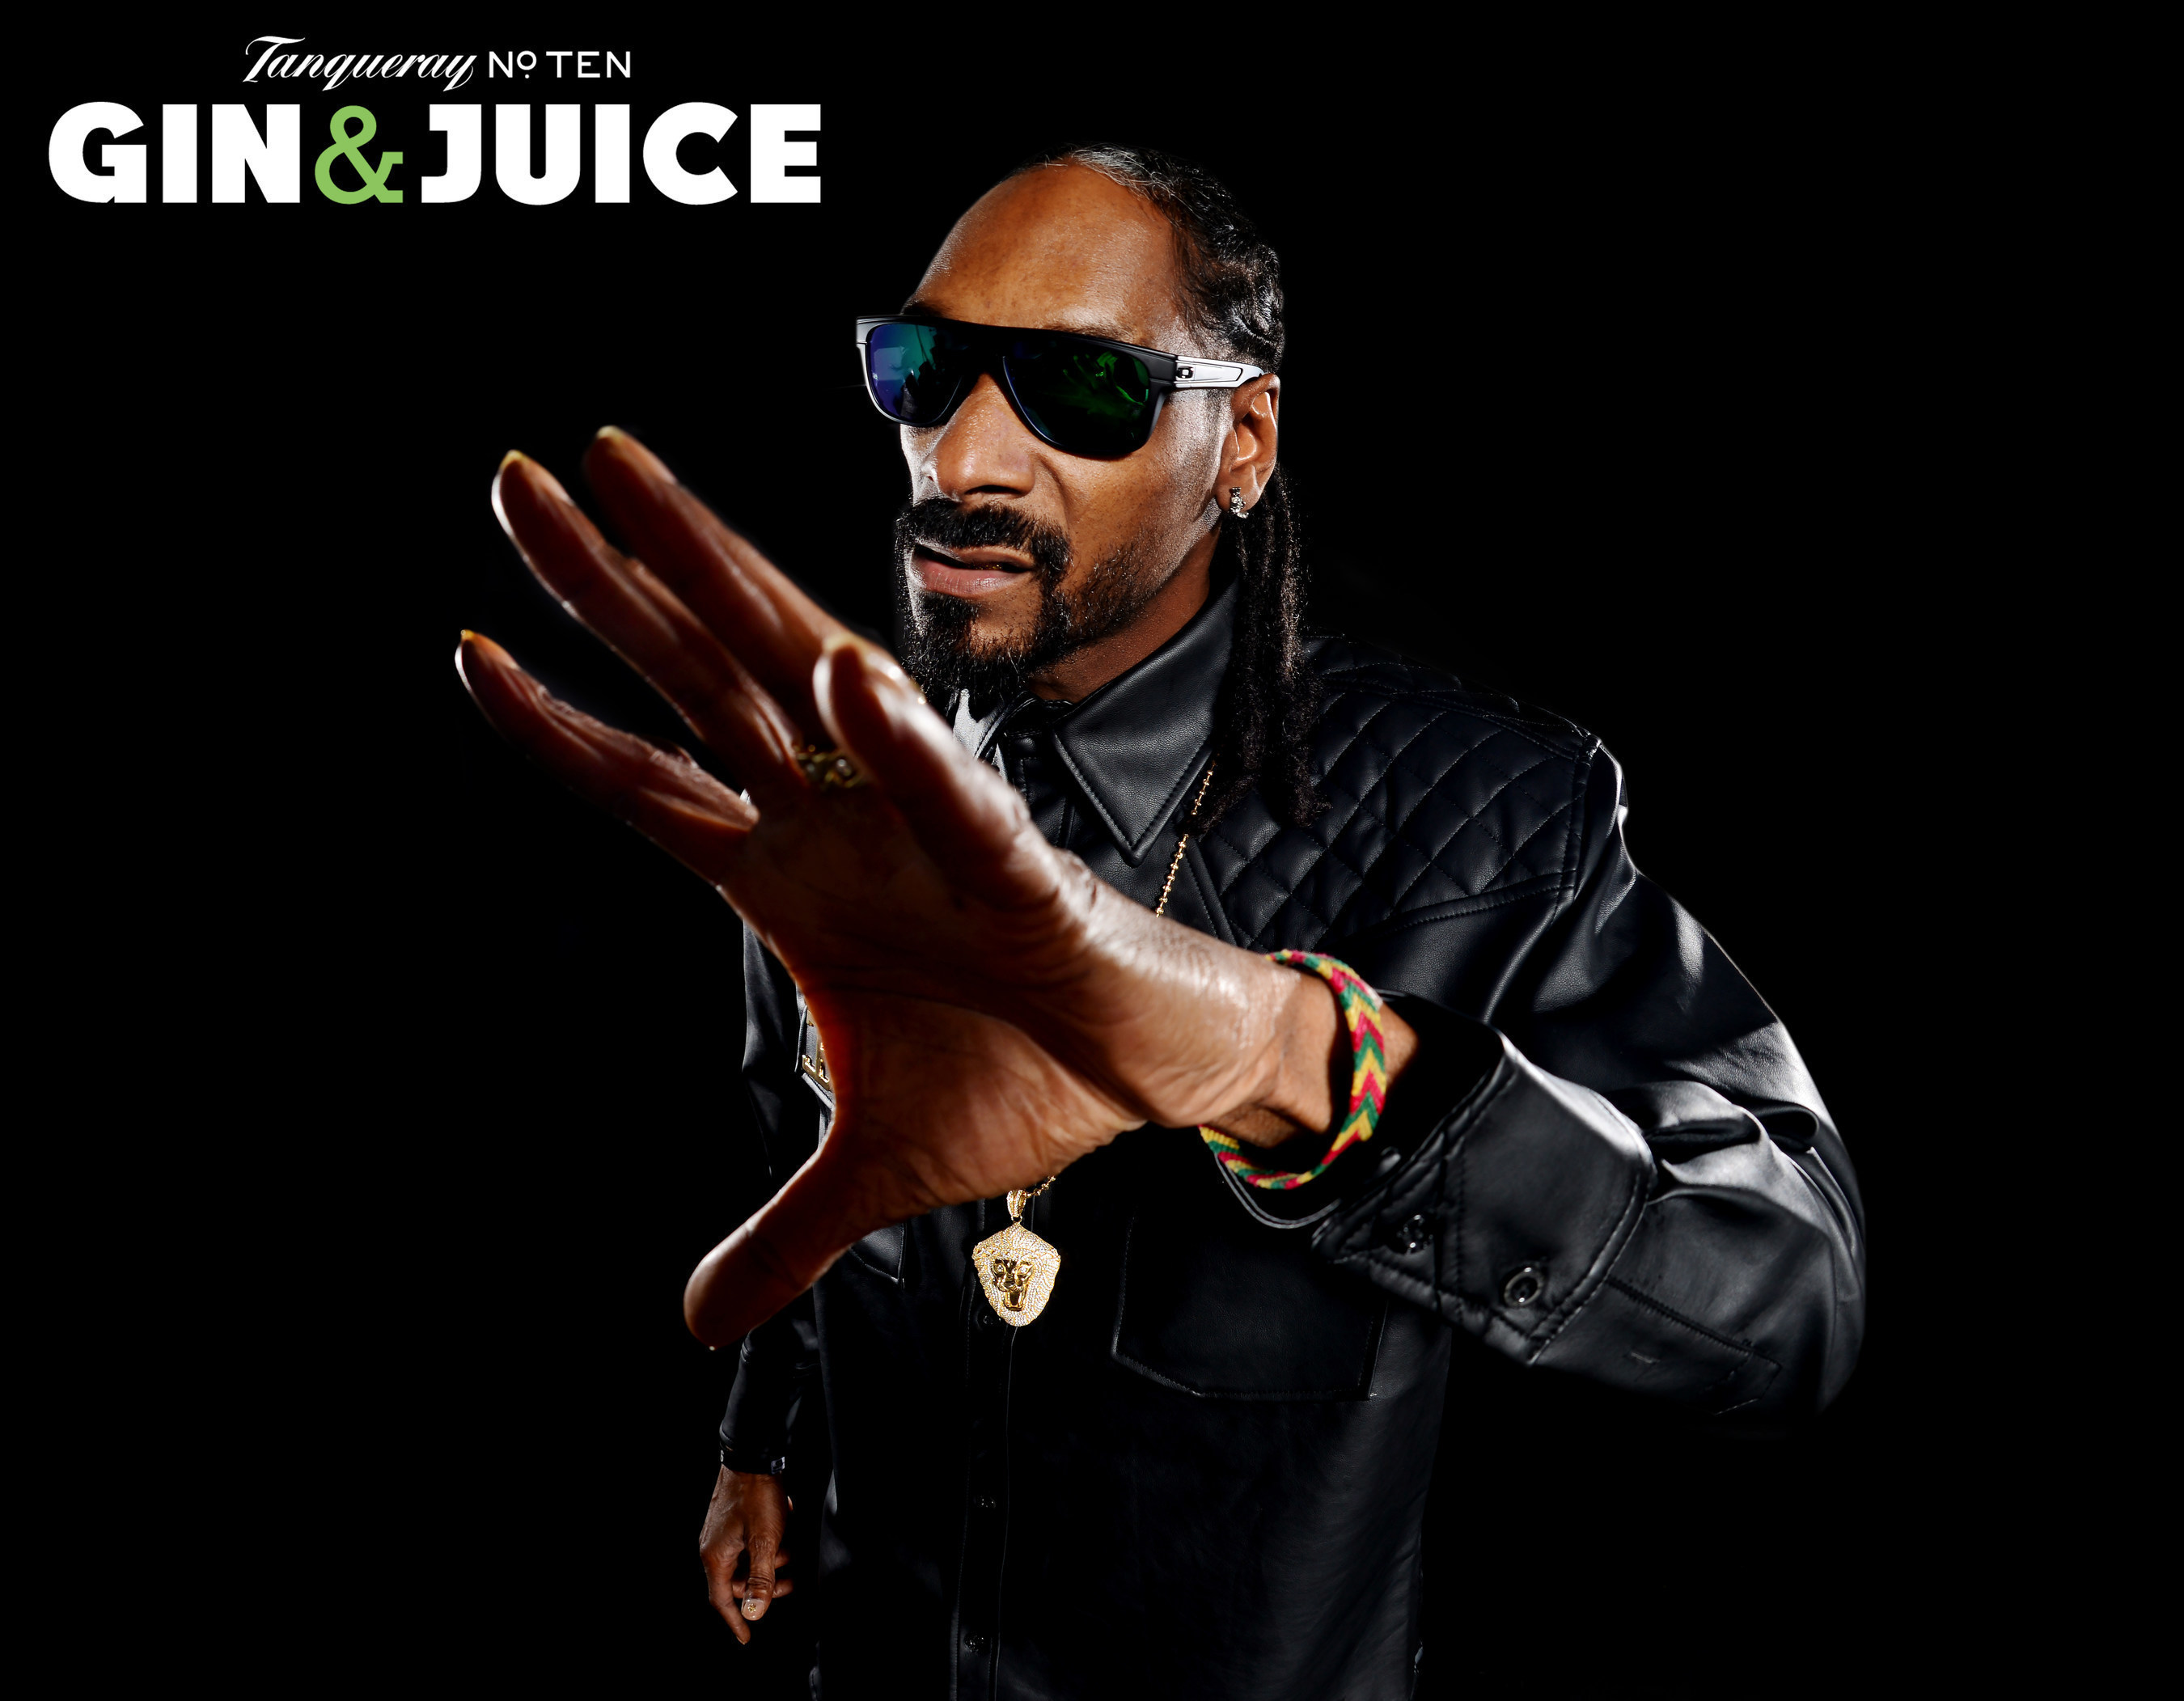 Tanqueray Gin(TM) announces the launch of a new strategic partnership with entertainment icon Snoop Dogg